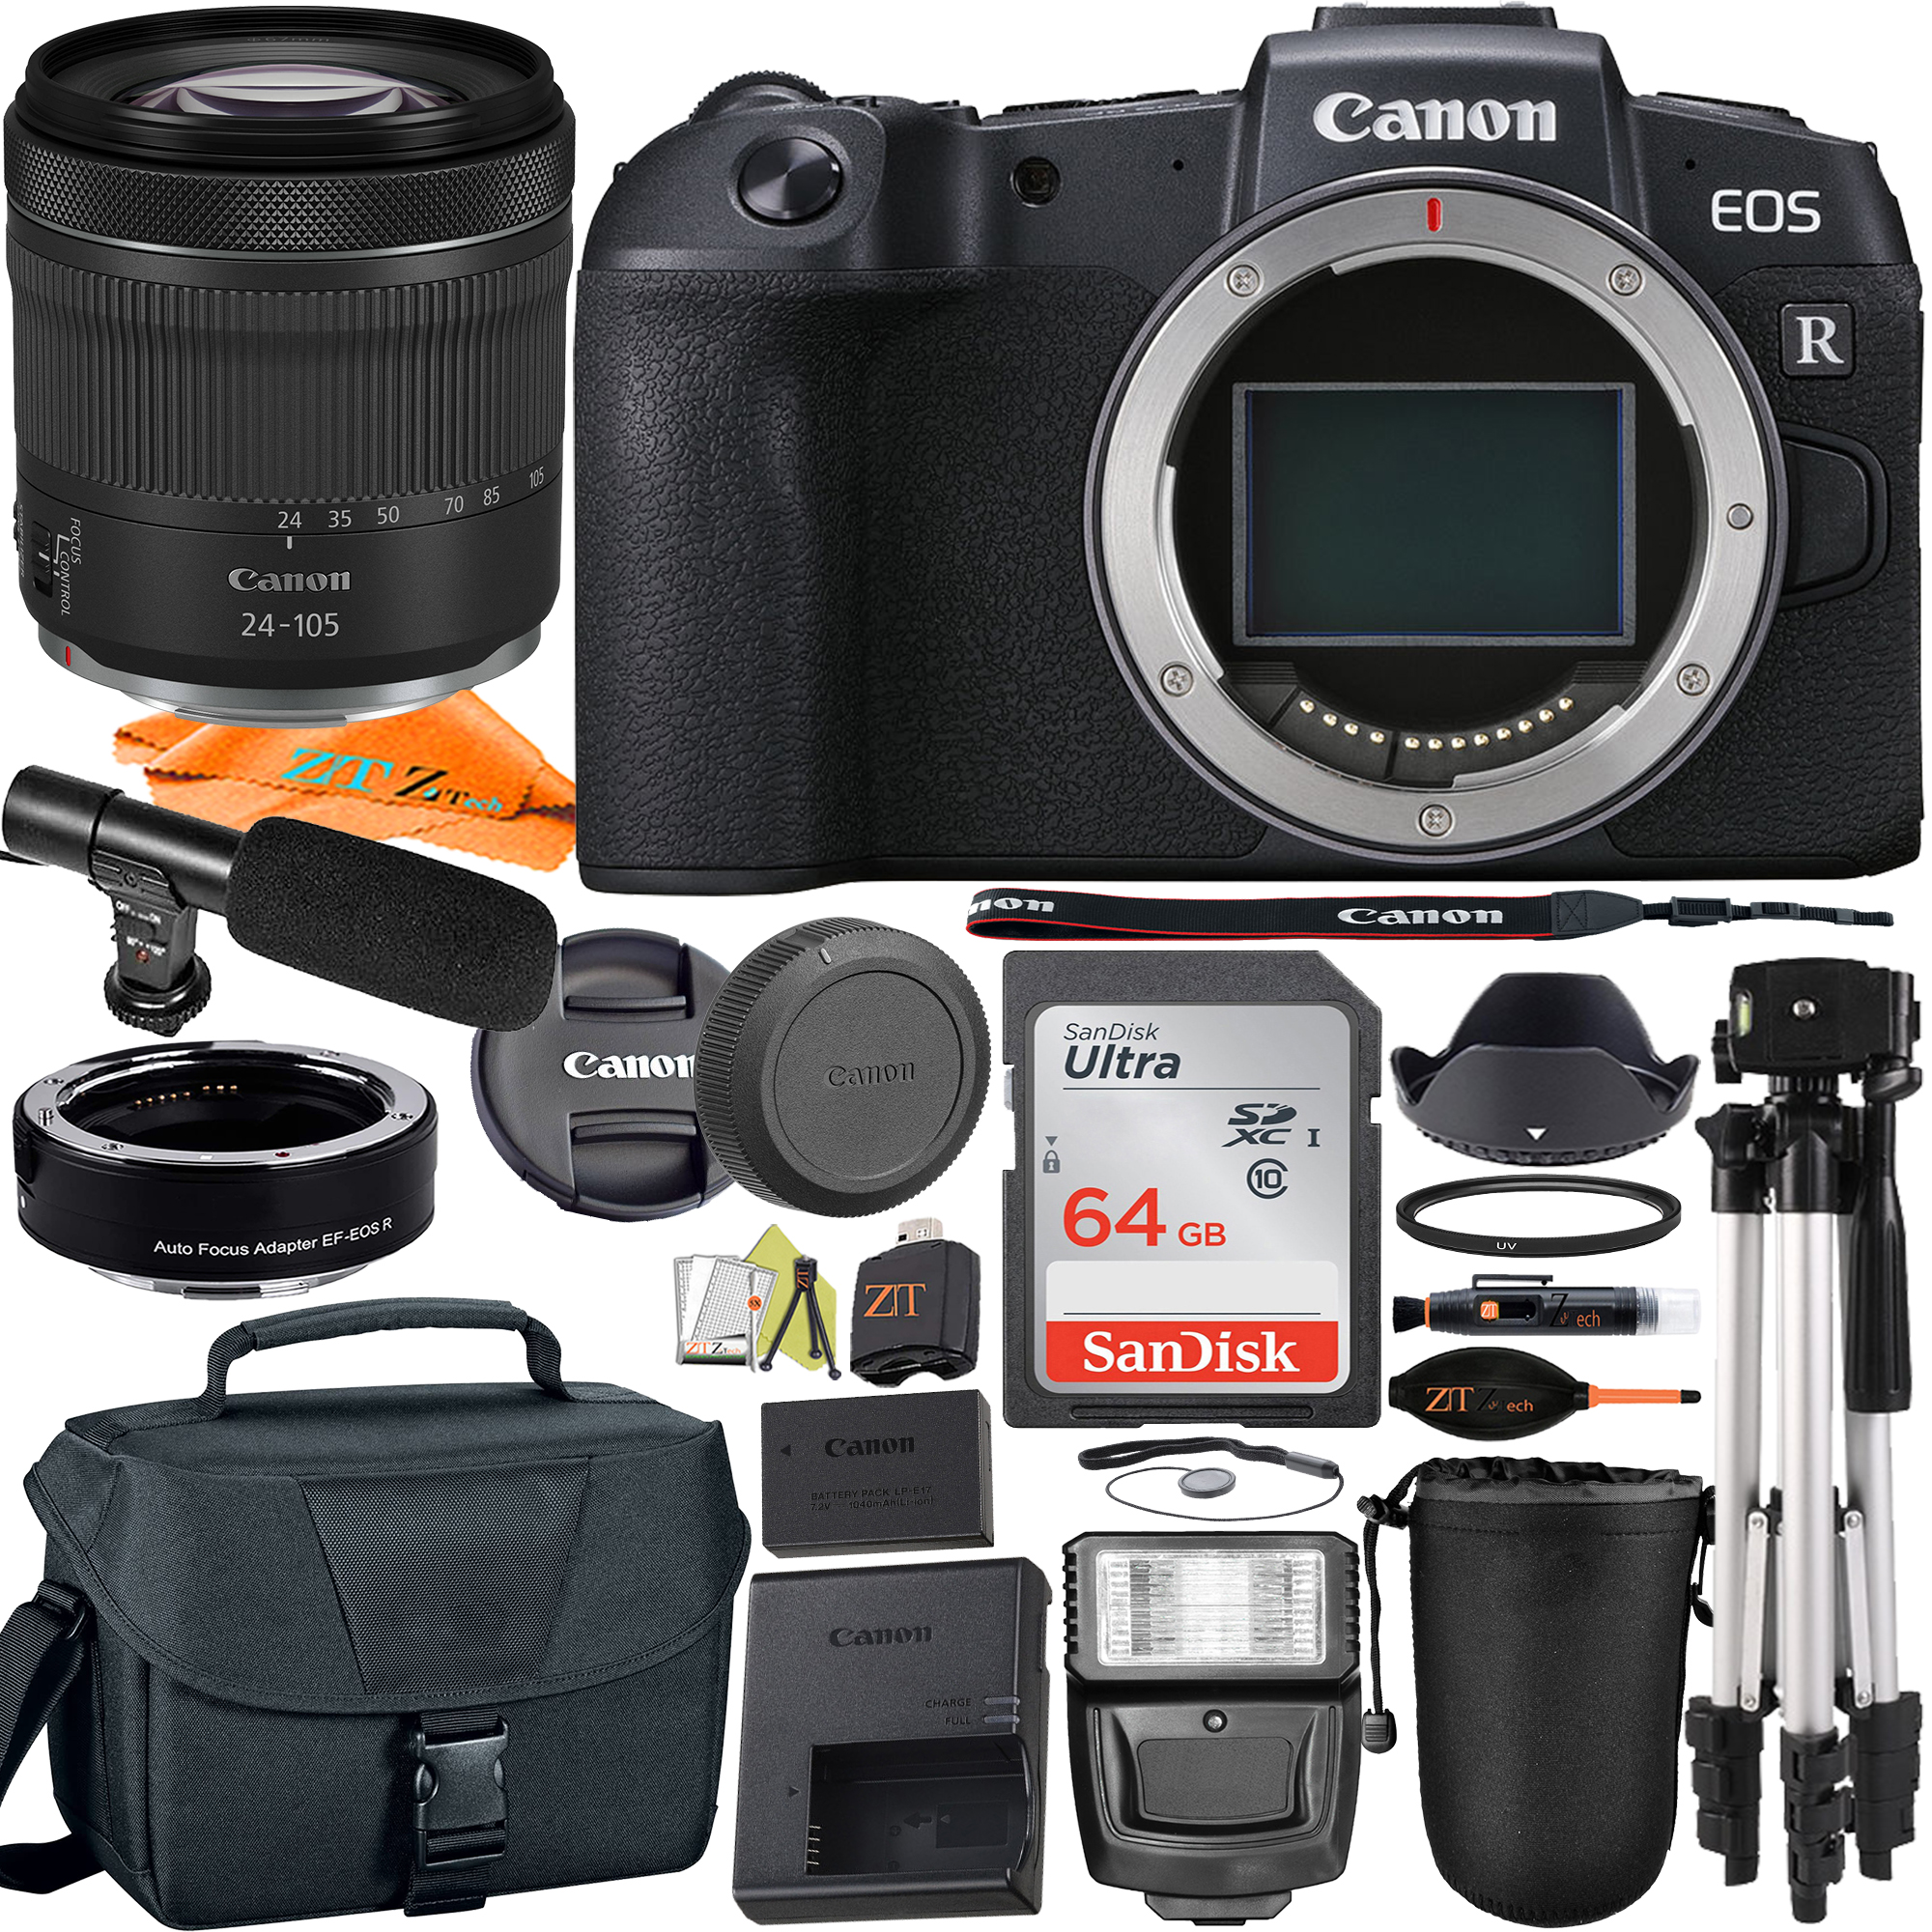 Canon EOS RP Mirrorless Digital Camera with RF24-105mm Lens + Mount Adapter + SanDisk 64GB + ZeeTech Accessory Bundle